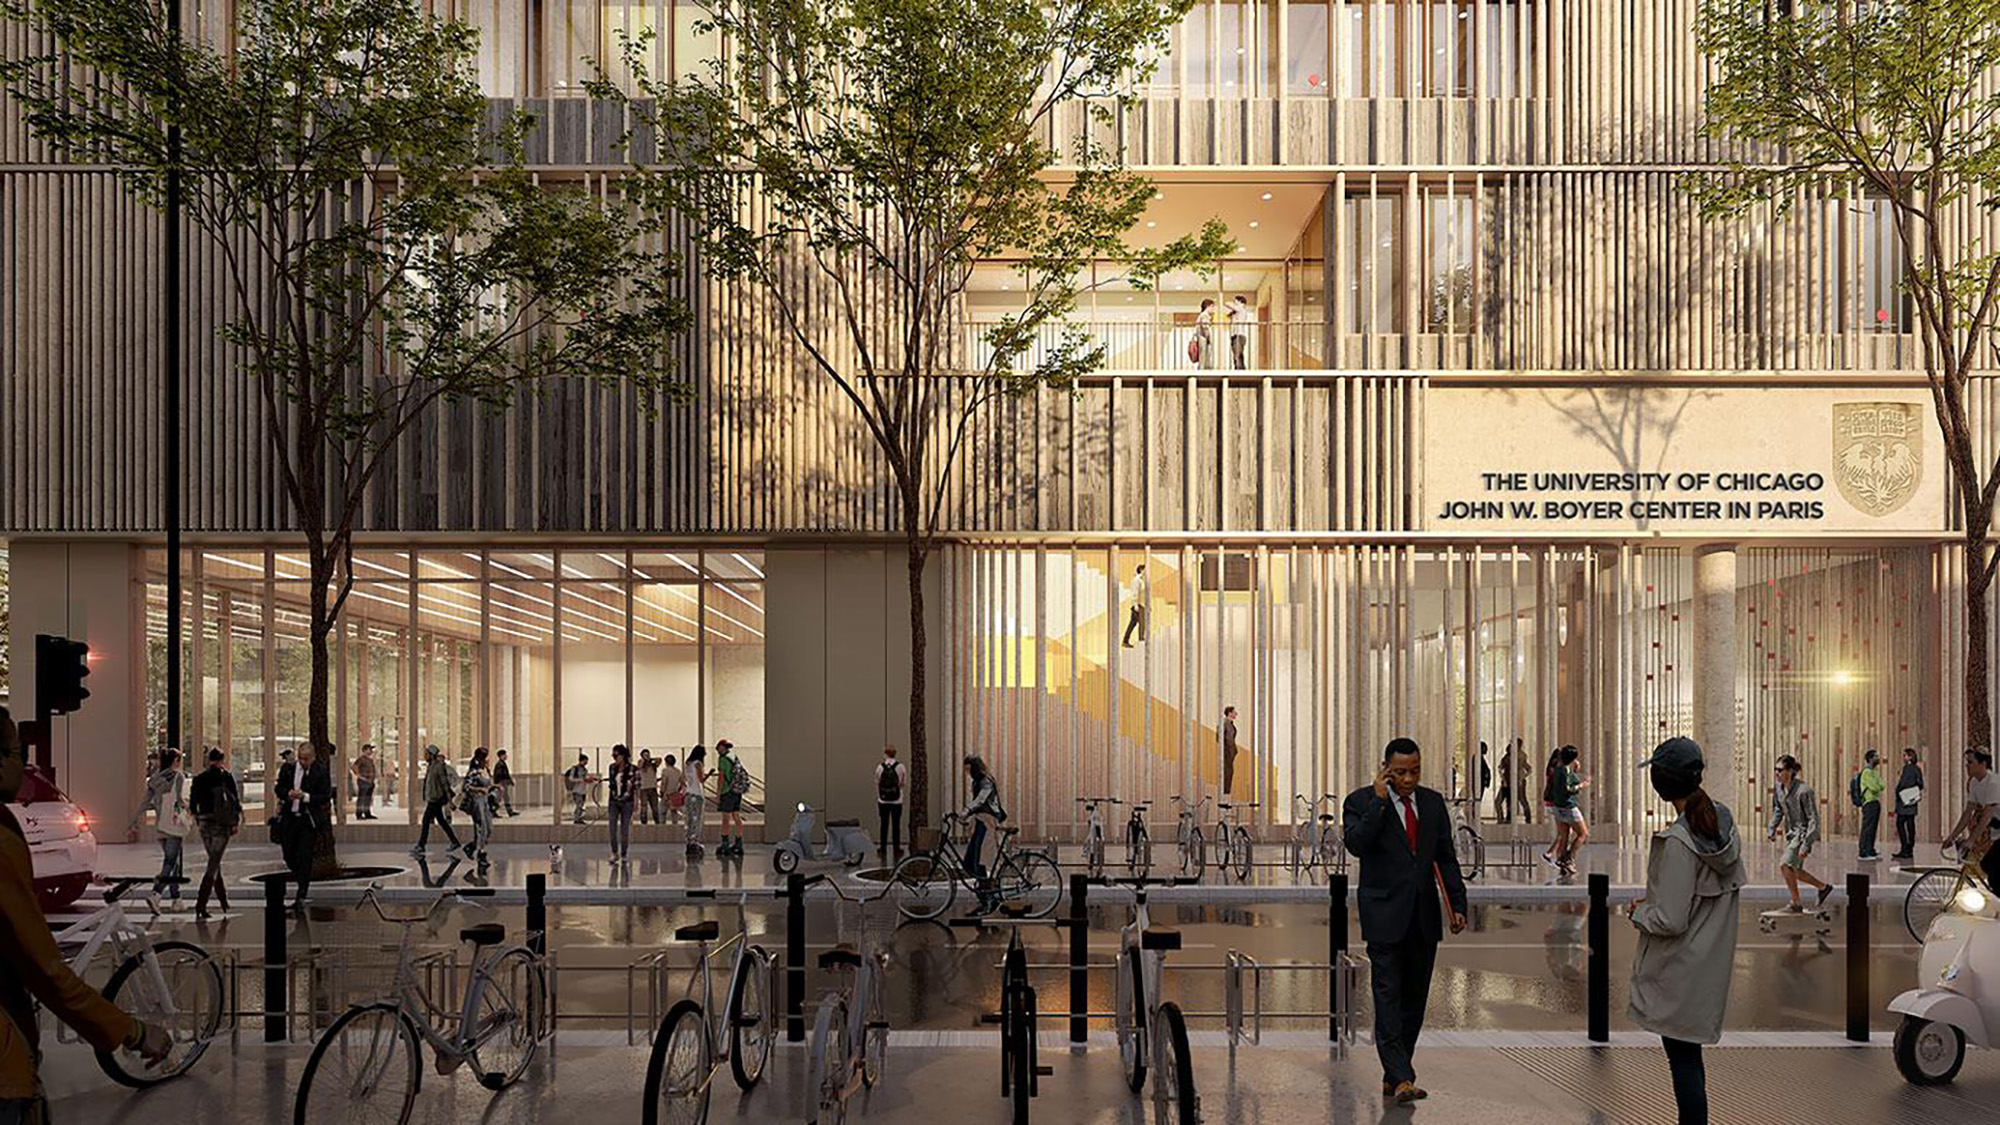 Rendering of the new University of Chicago center in Paris